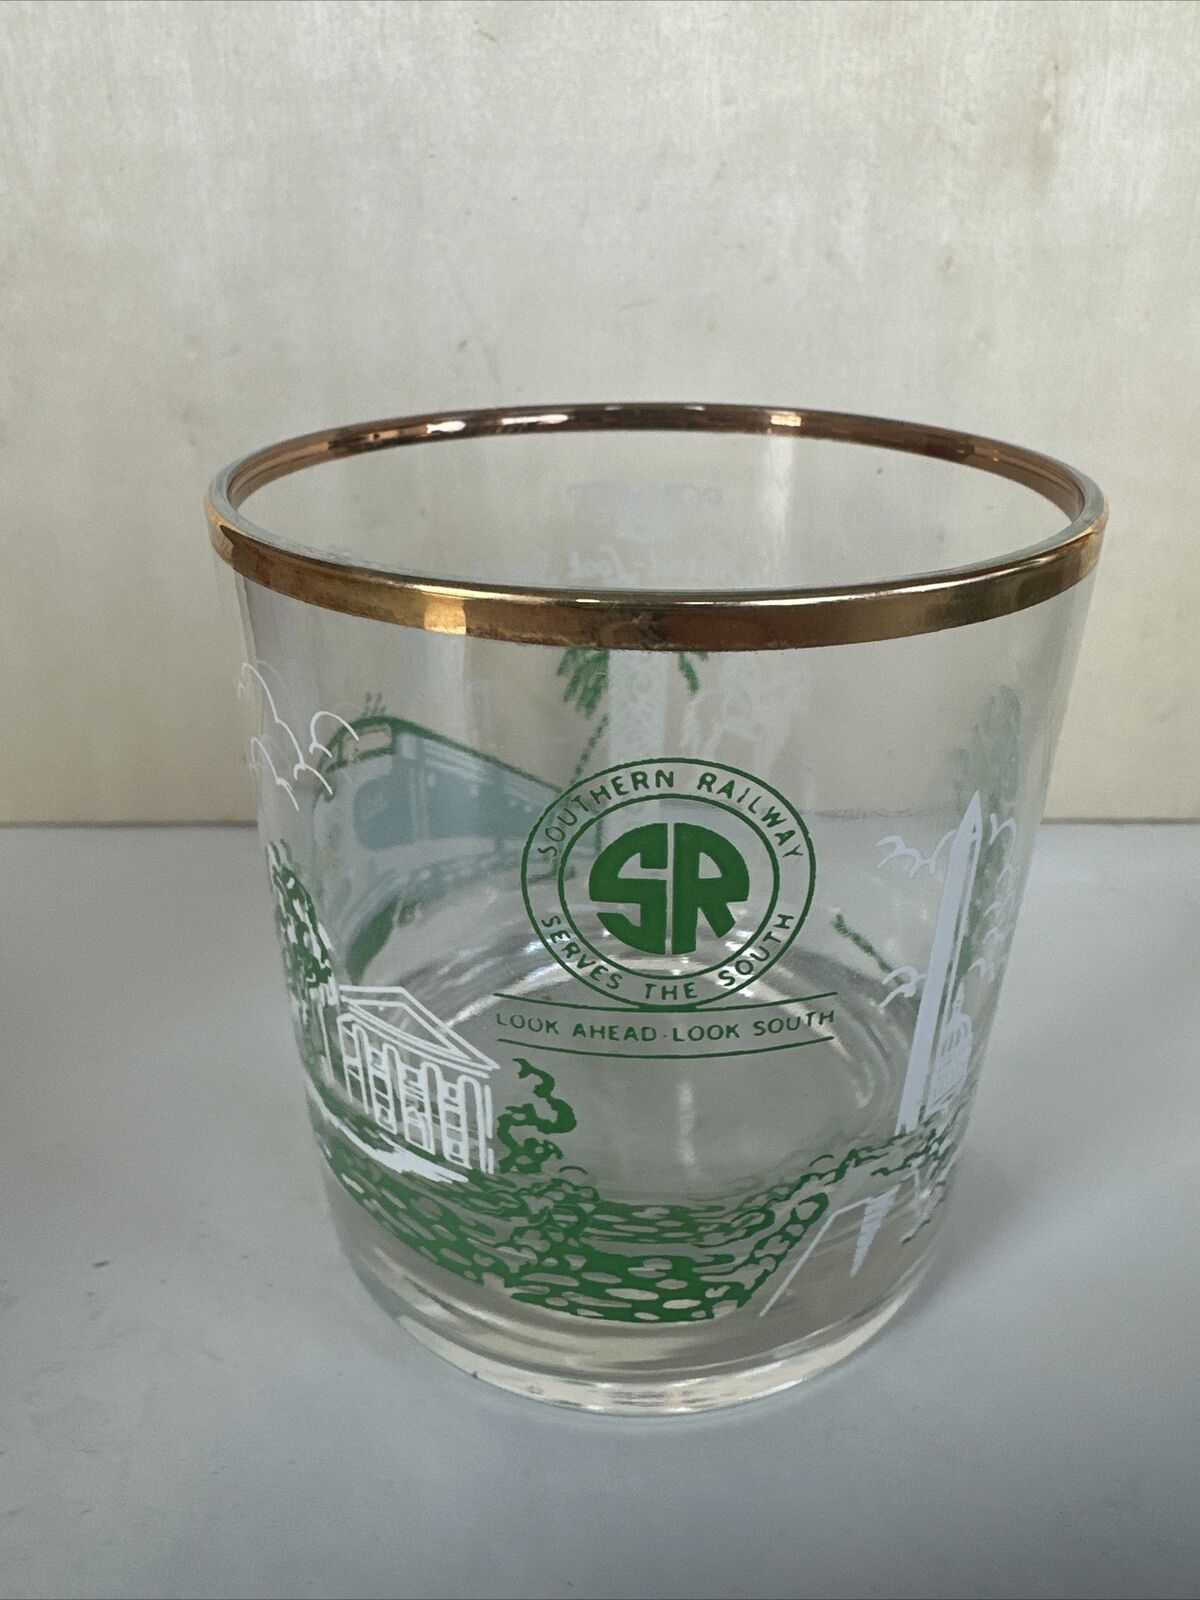 vintage southern railway Gold Rimmed Look Ahead And Look South Whiskey Glass